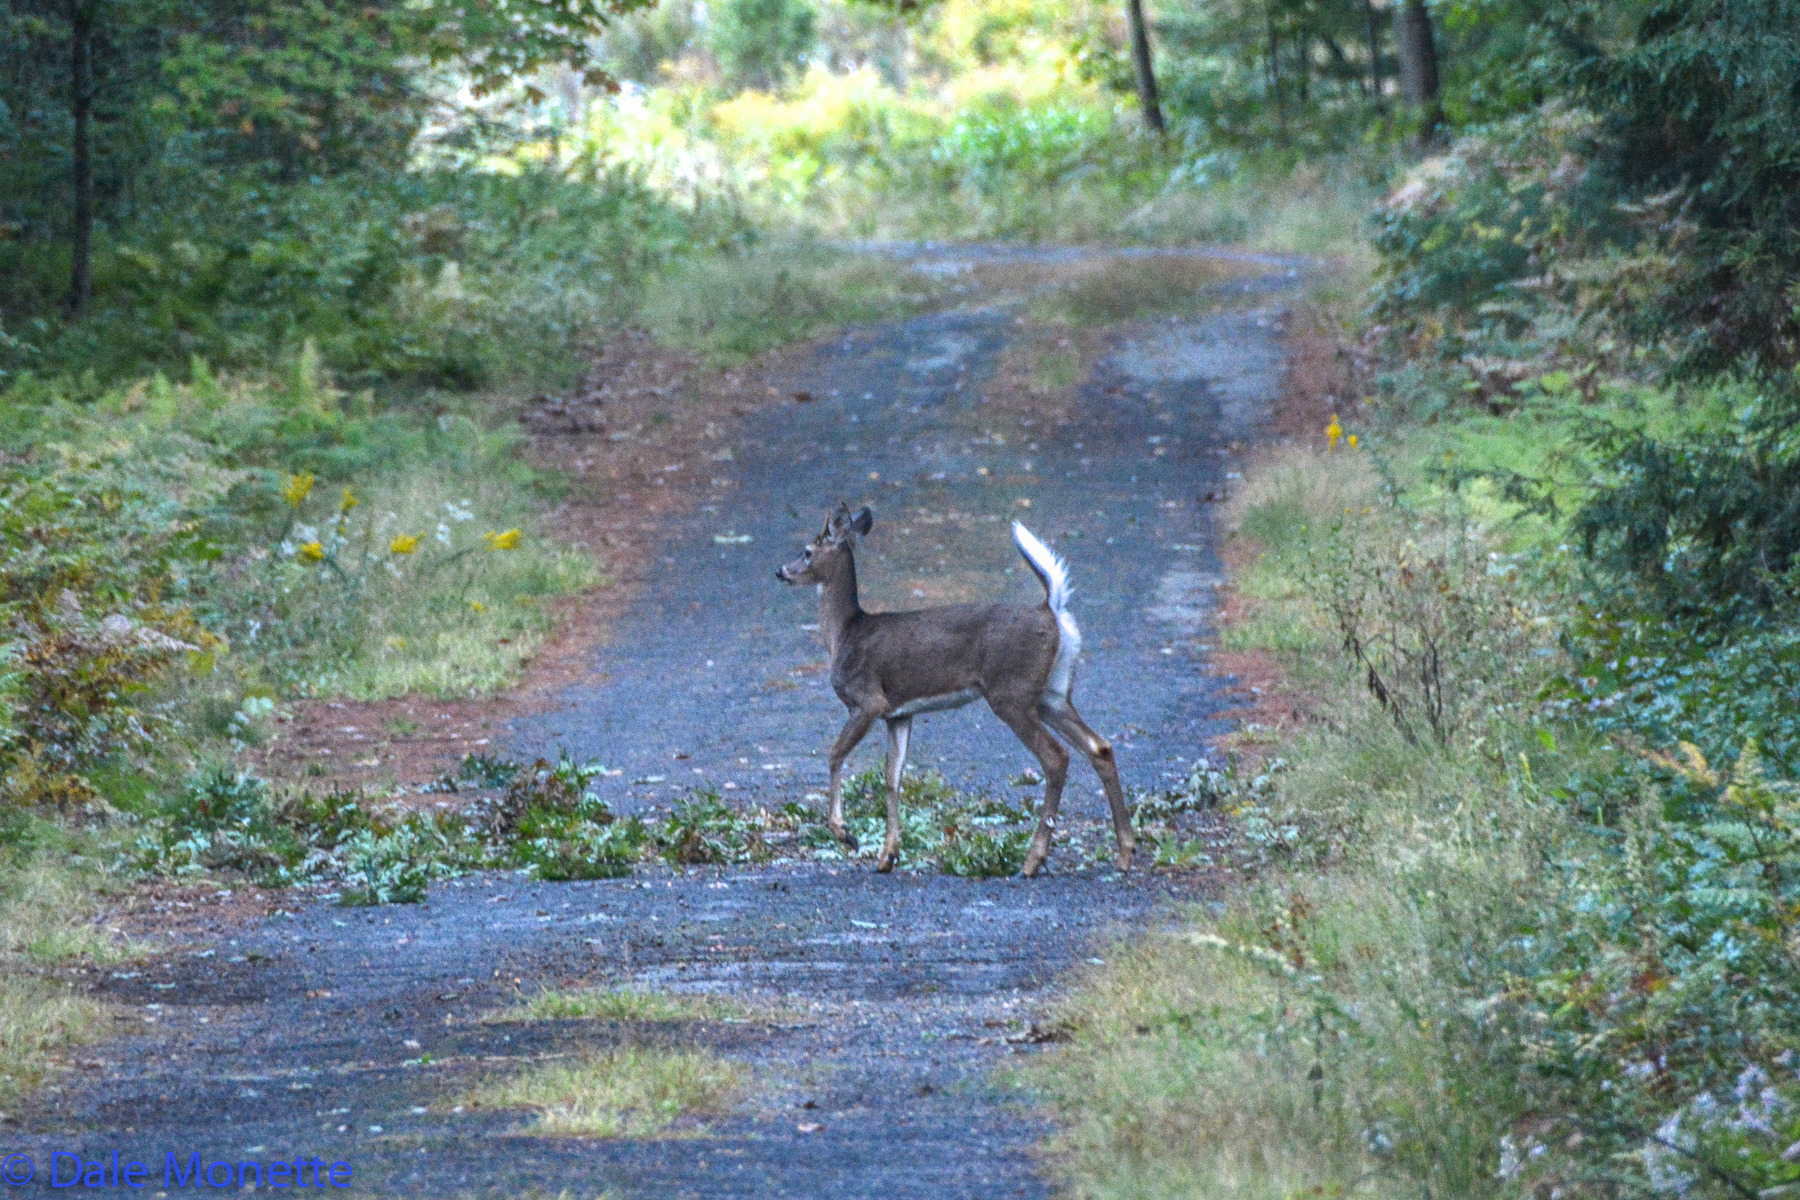   These twigs dropped in the road and made easy acorn eating for this young deer early in the morning.  